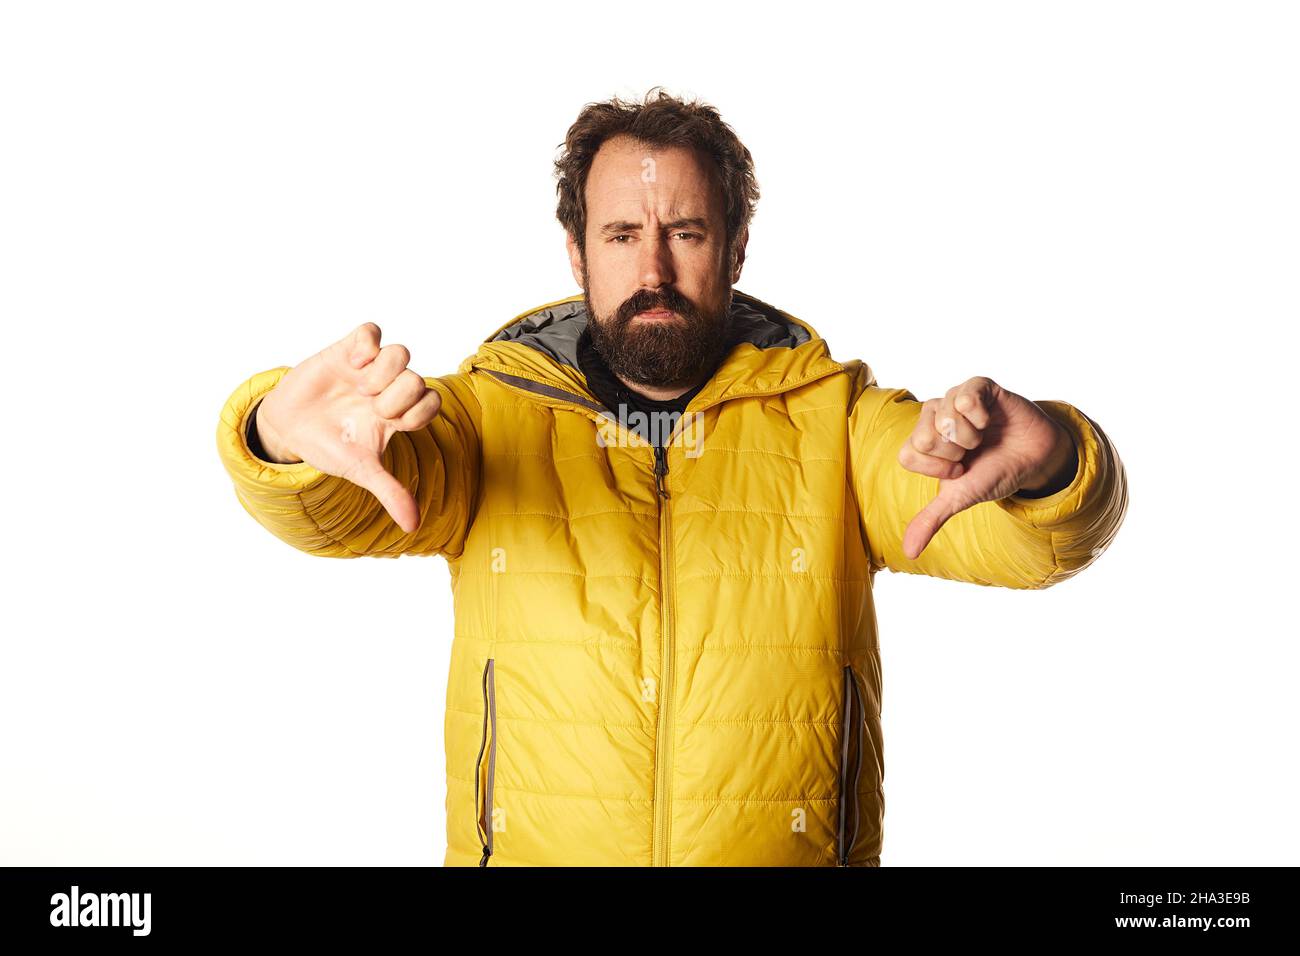 bearded man looking sad, disappointed or angry, showing thumbs down in disagreement, feeling frustrated. Stock Photo